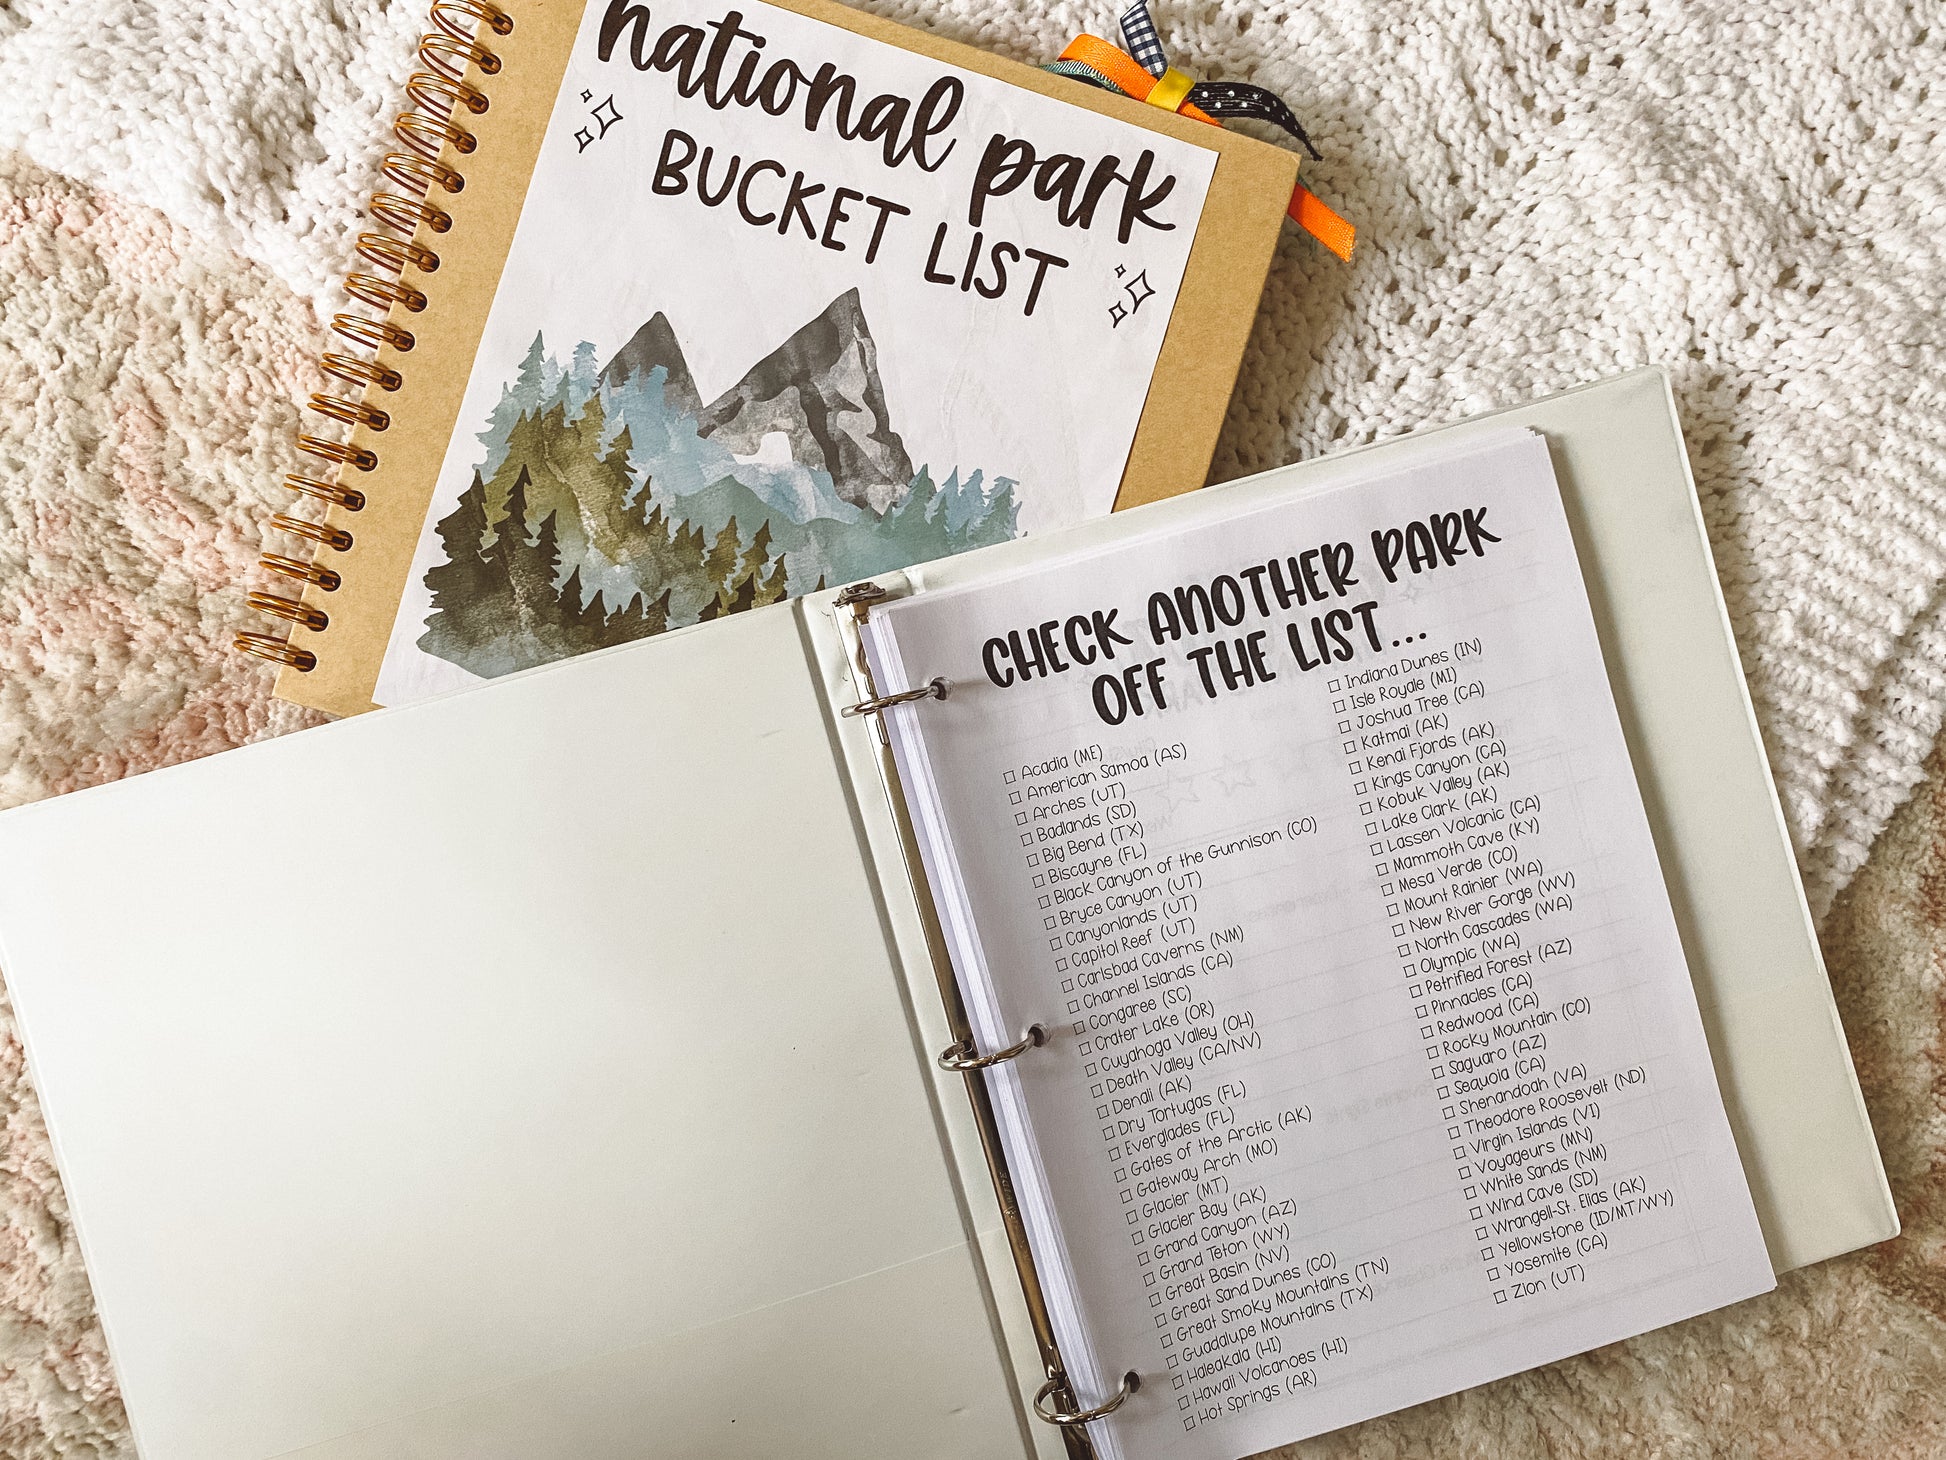 Interior of binder shows the National Parks checklist as the first page.